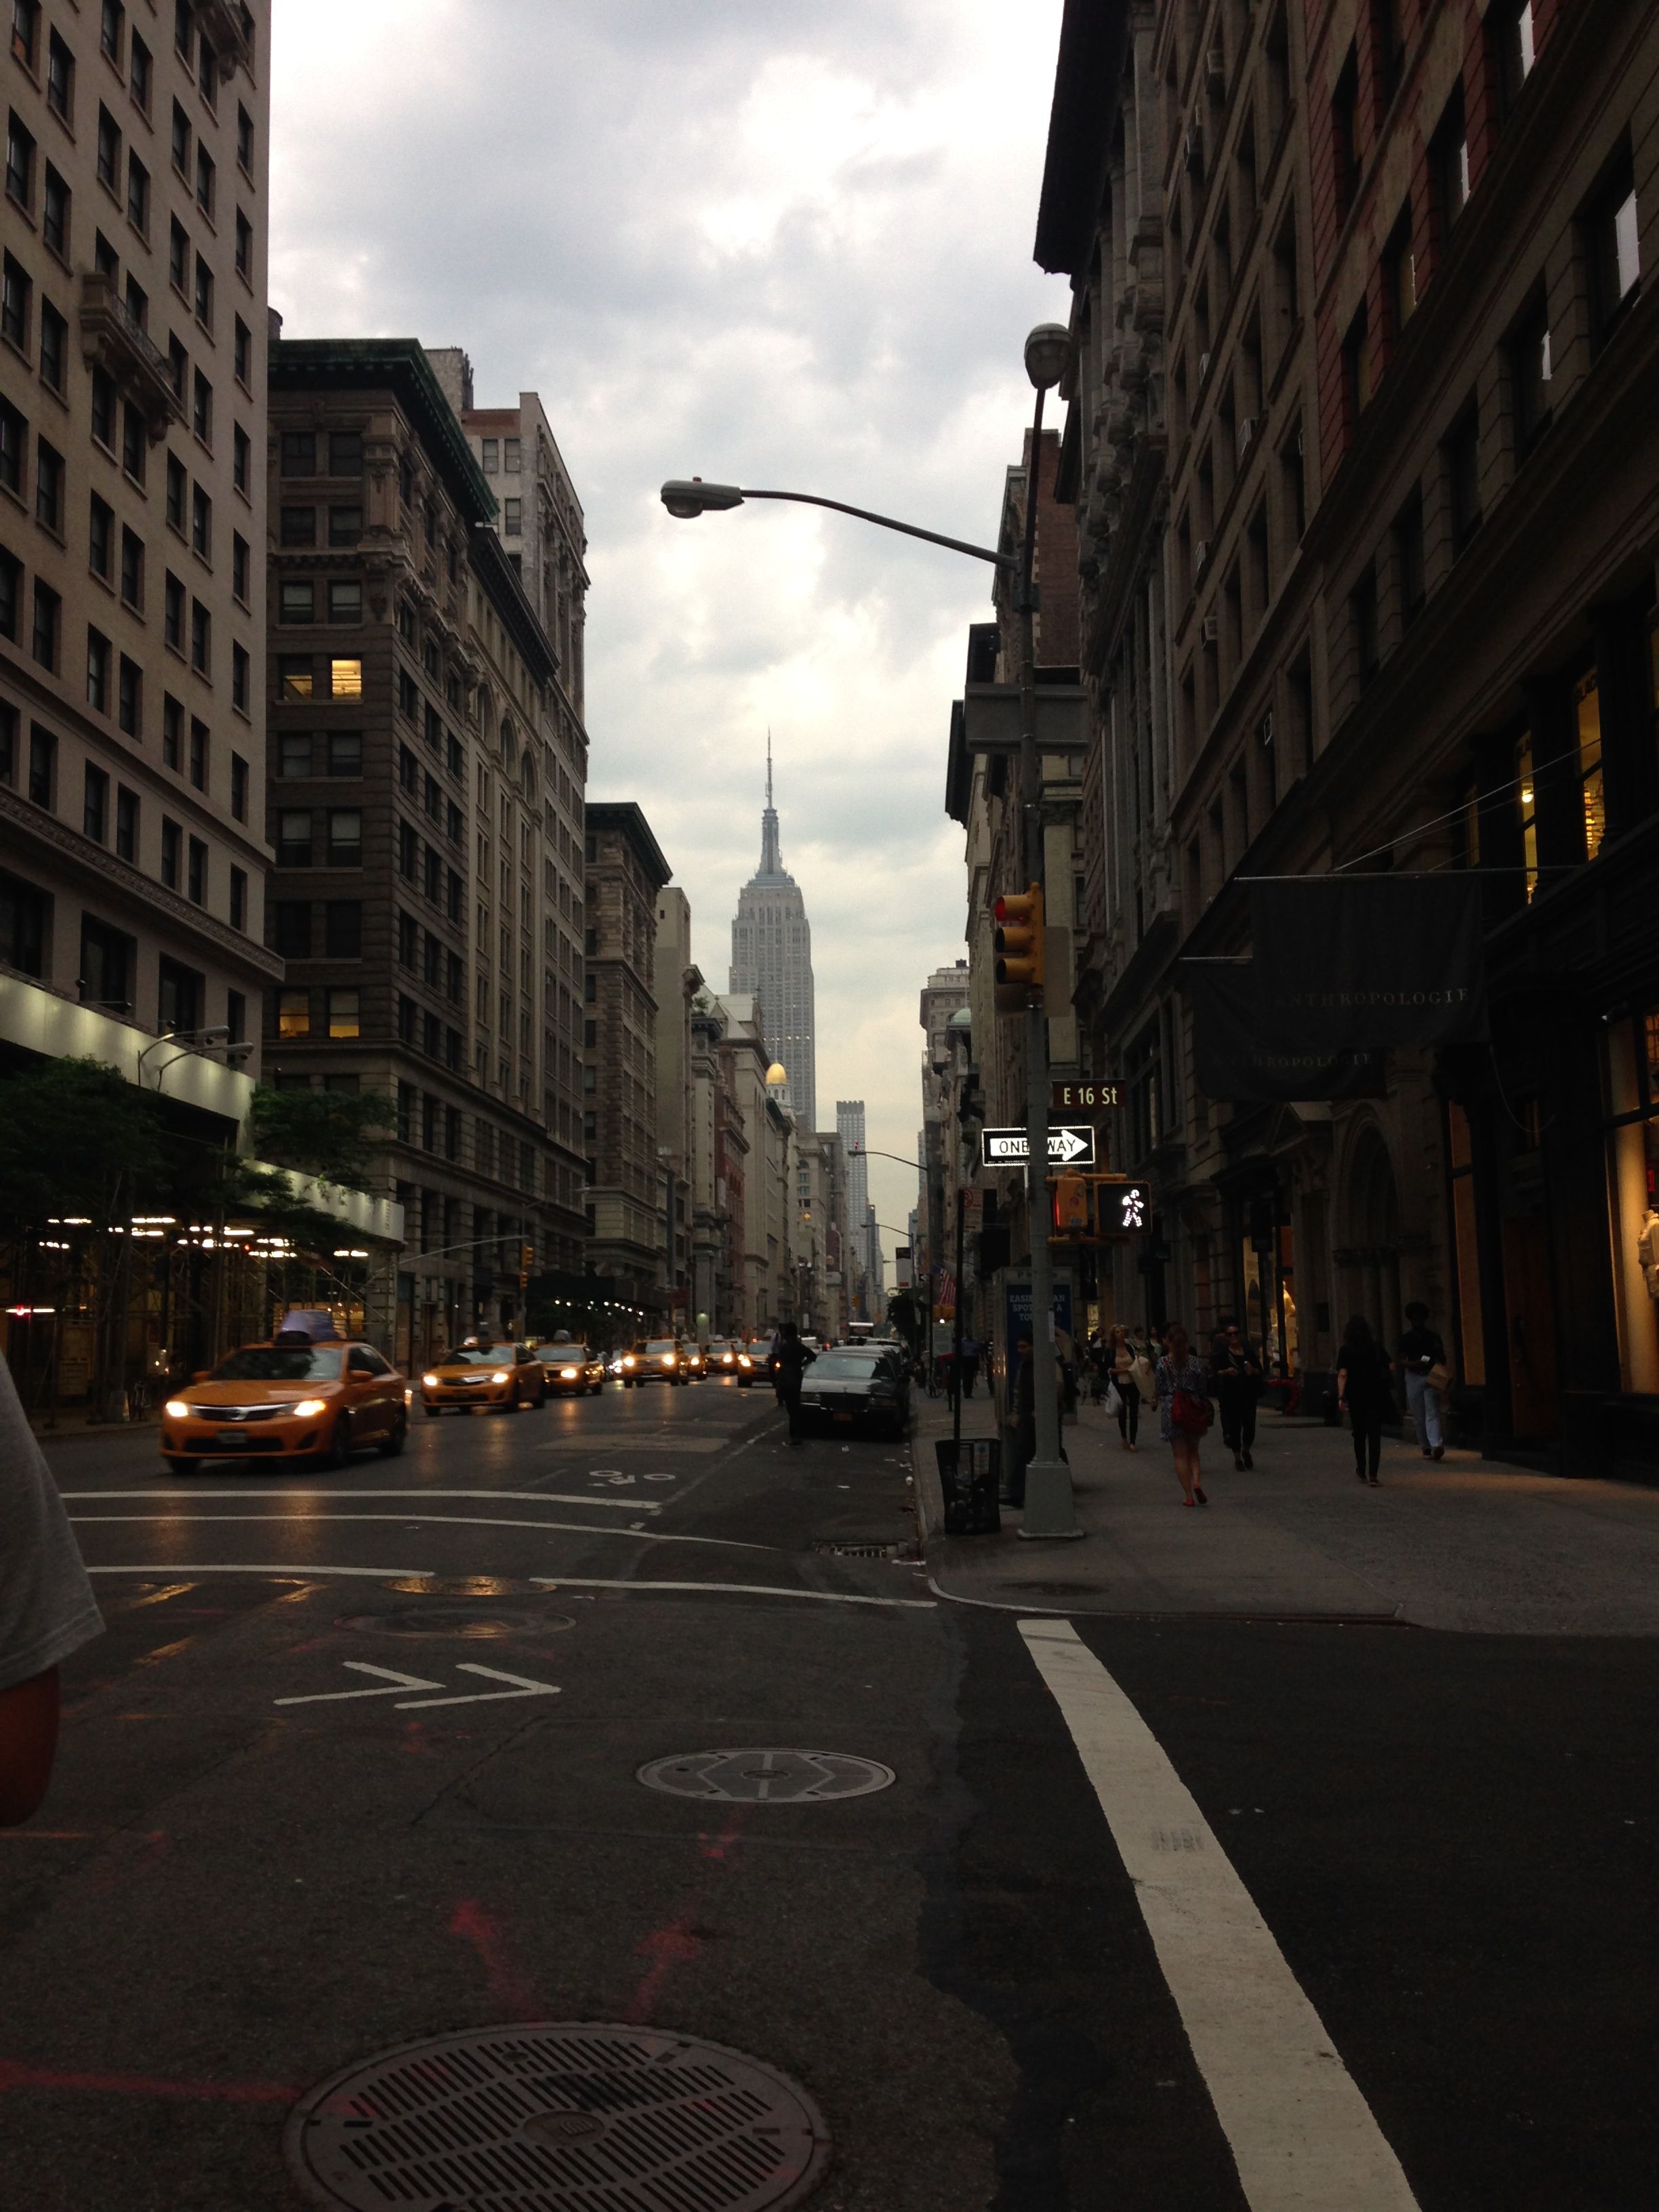 Photo taken on East 16th St in New York City with the Chrysler Building visible under a cloudy sky. A line of taxis is visible with their headlights on.